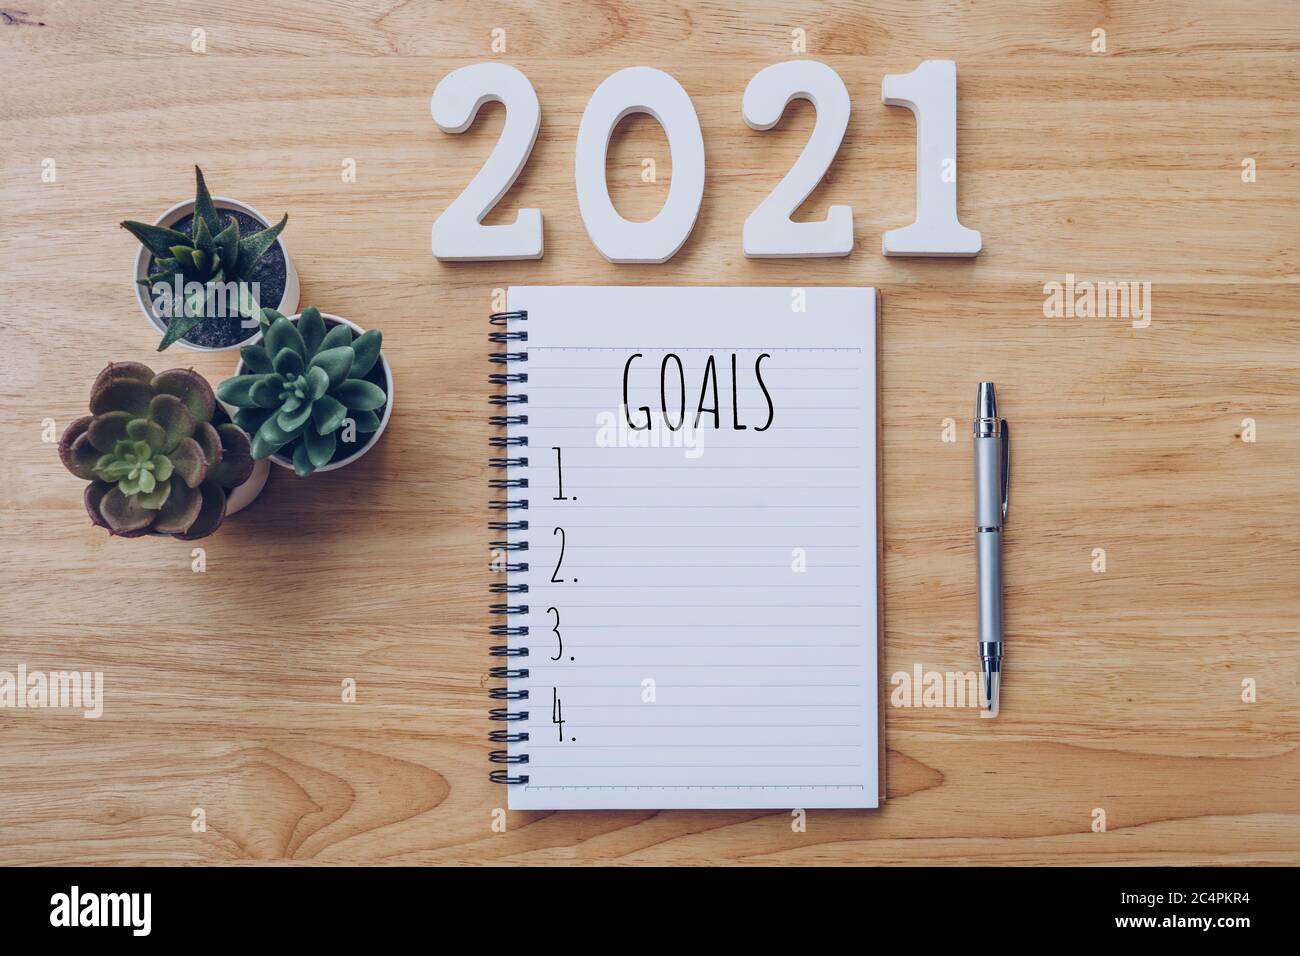 New year 2021 goals list. Office desk table with notebooks and pancil with pot plant. Stock Photo